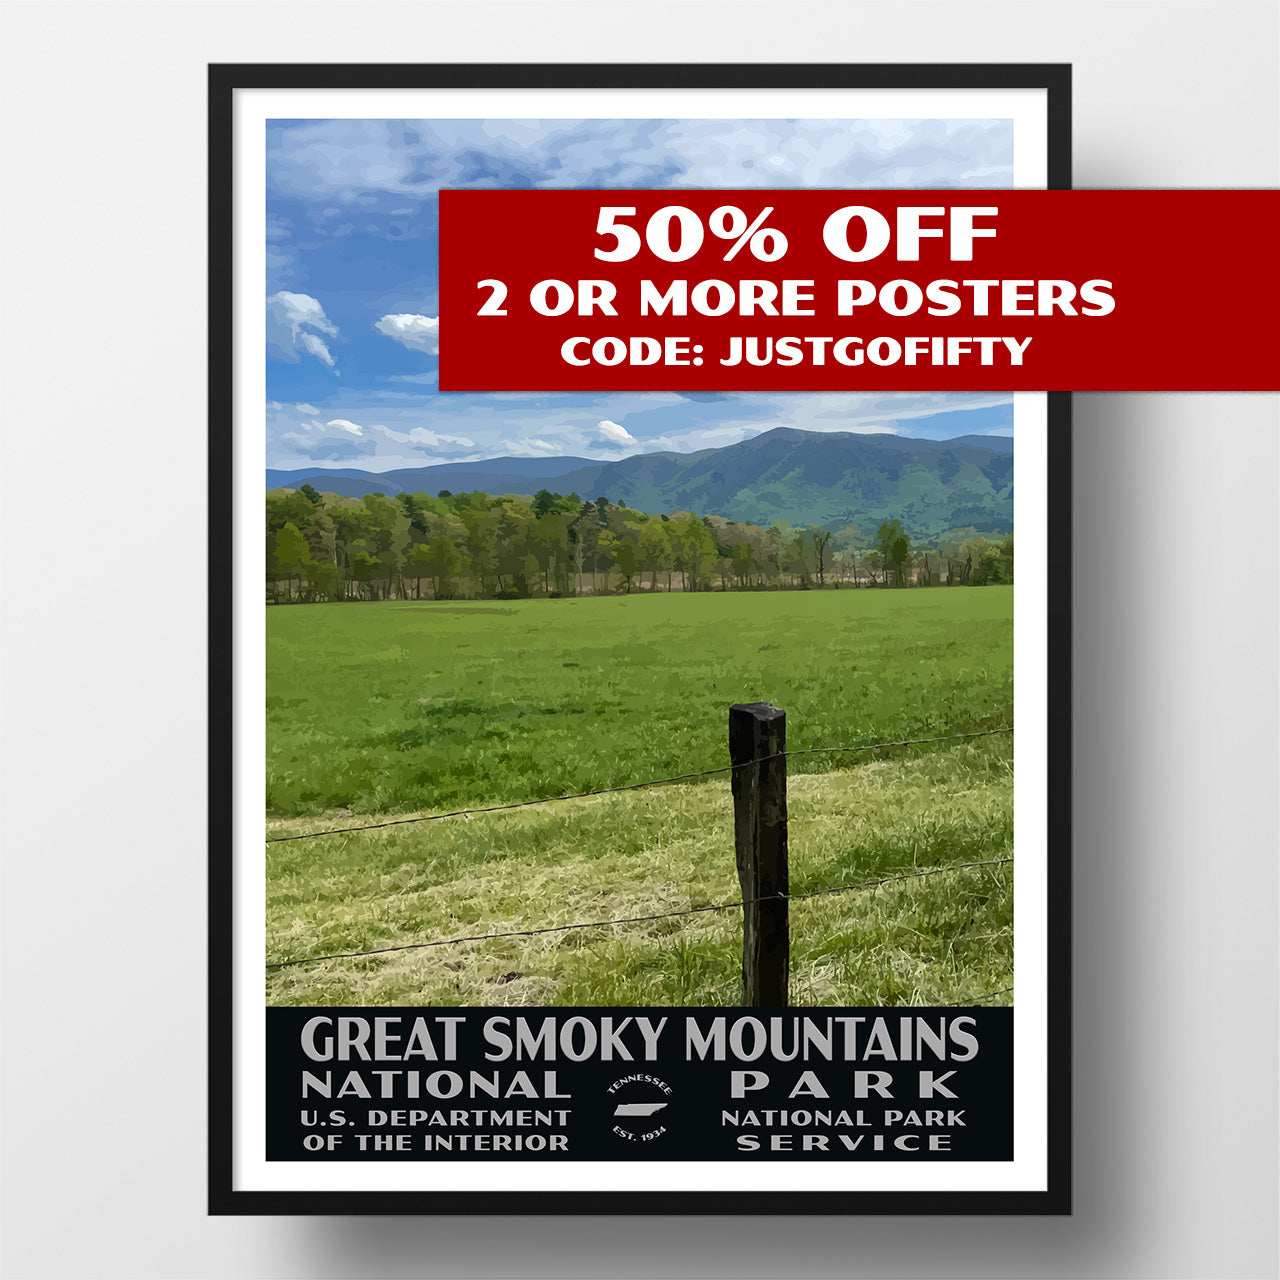 Great Smoky Mountains National Park Poster-WPA (Cades Cove)